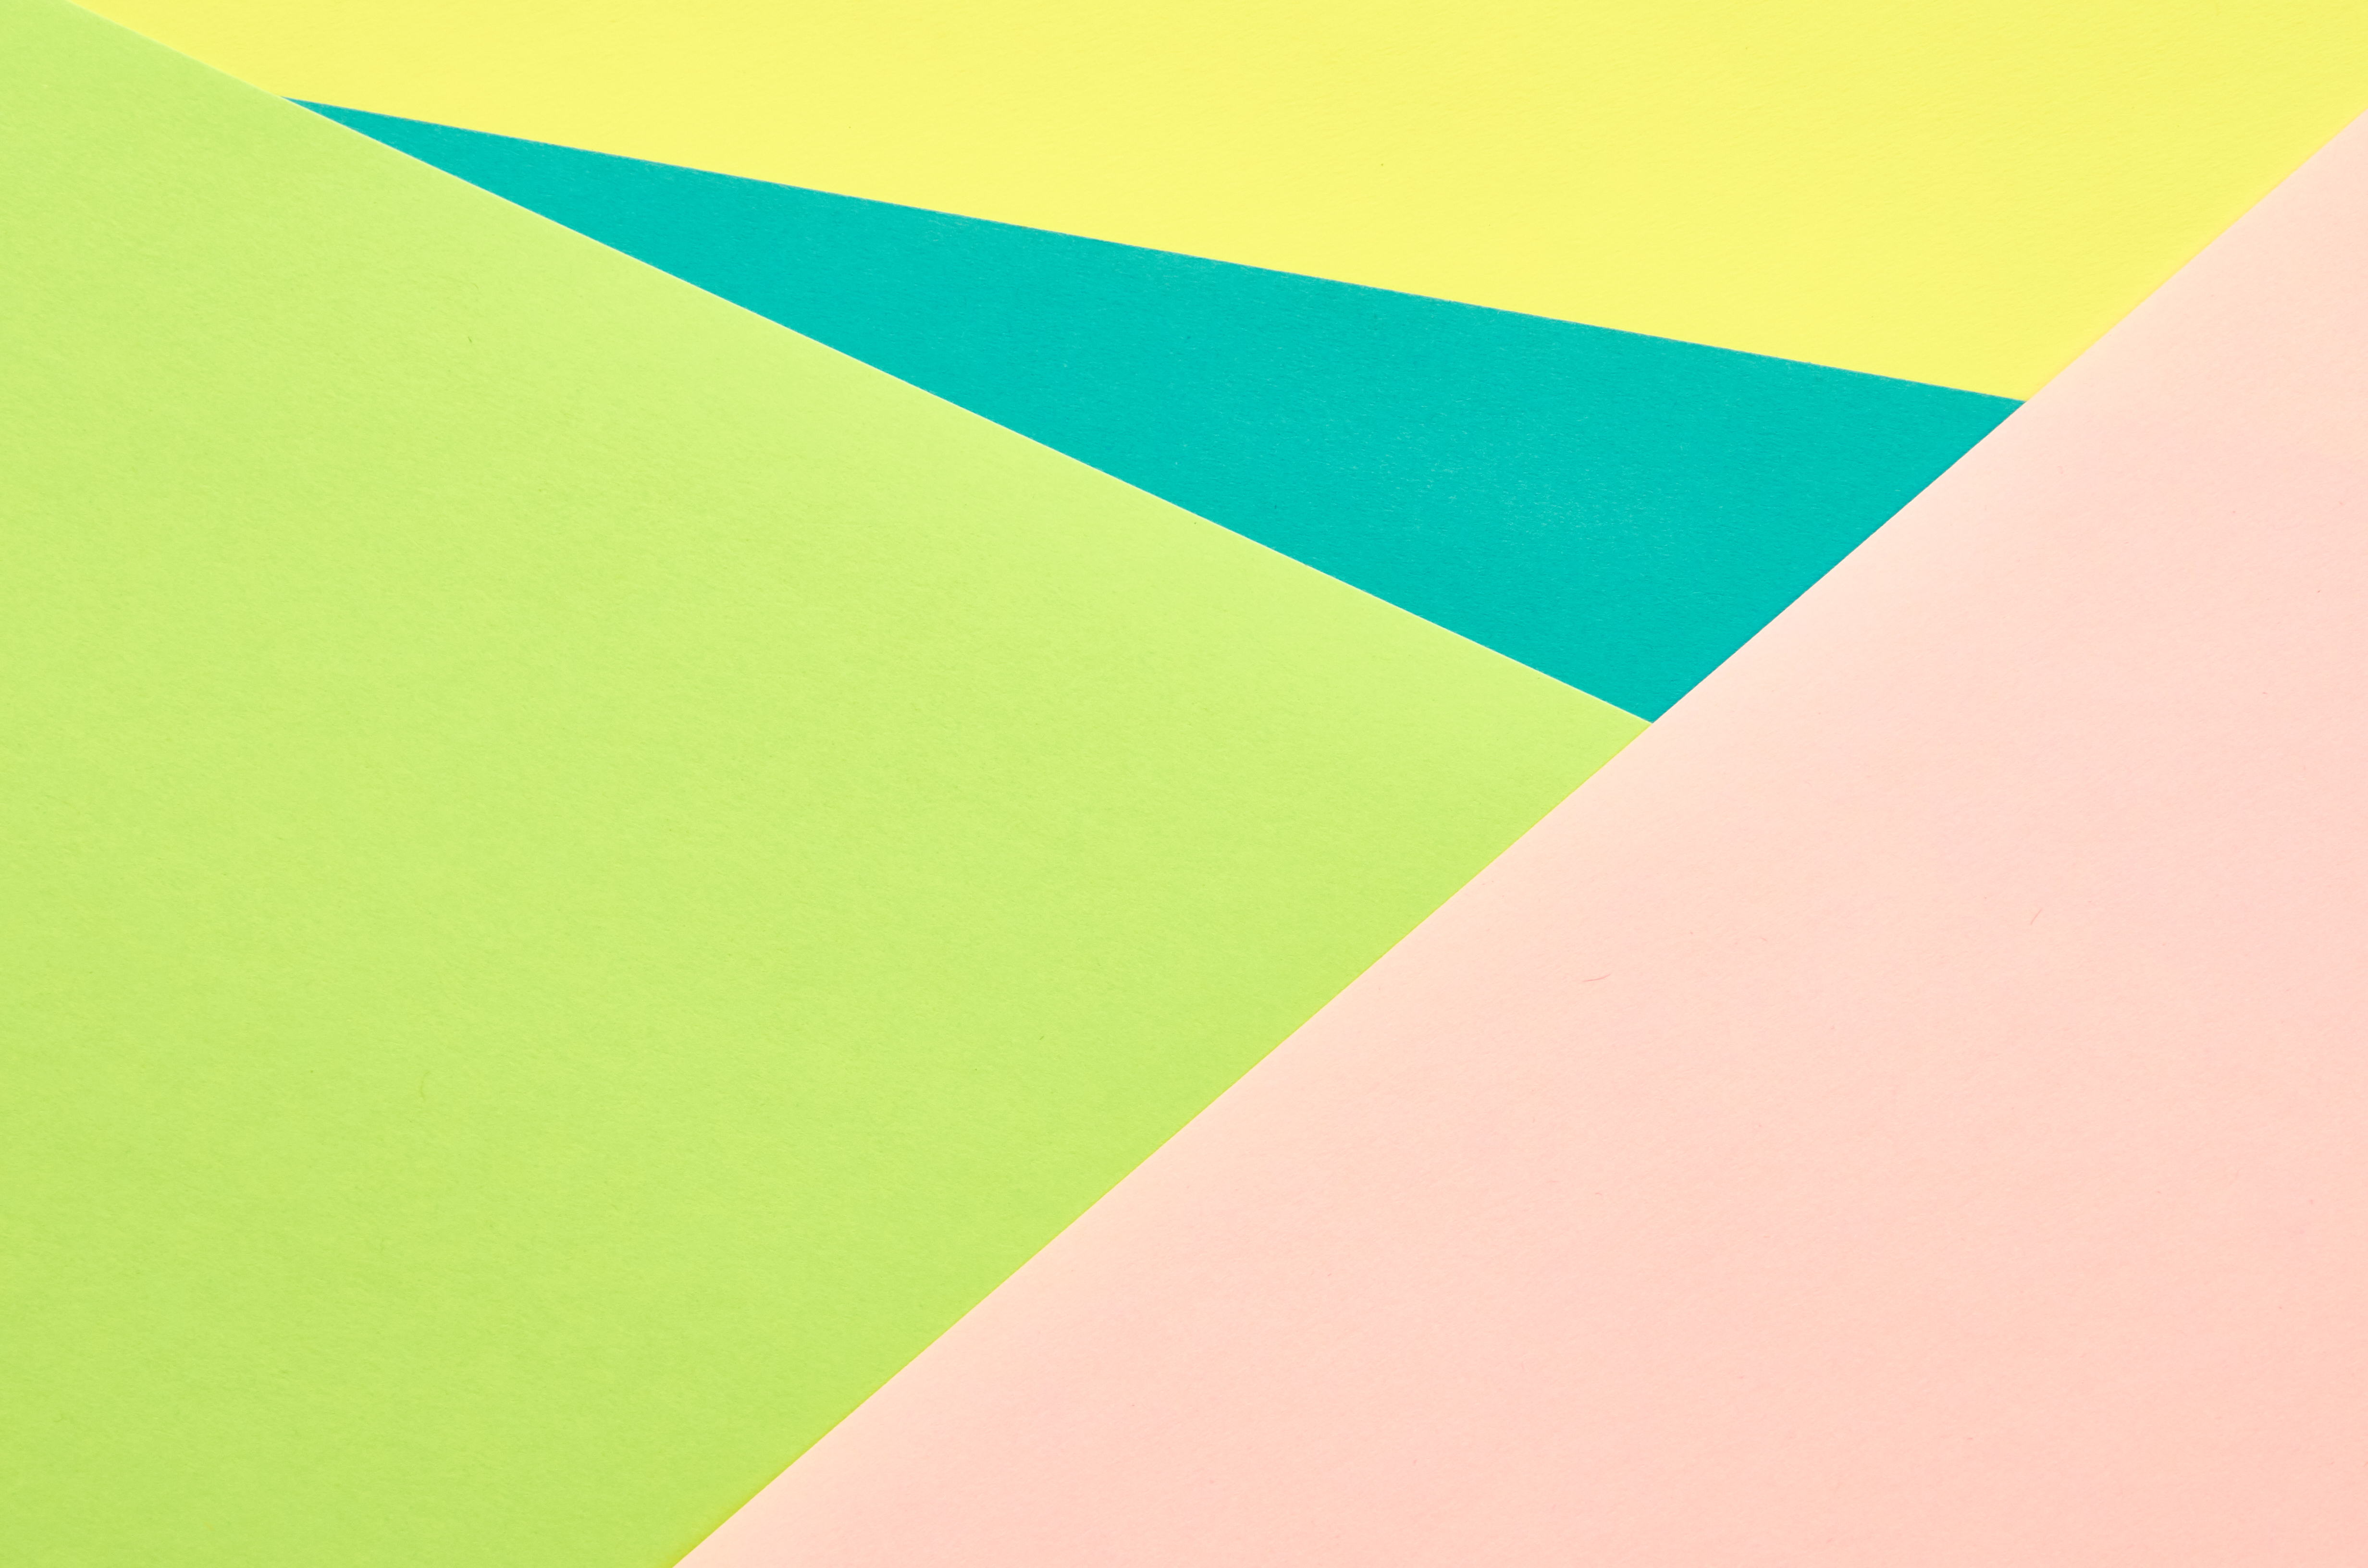 multicolored, motley, abstract, shape, shapes, triangles, fragments Smartphone Background